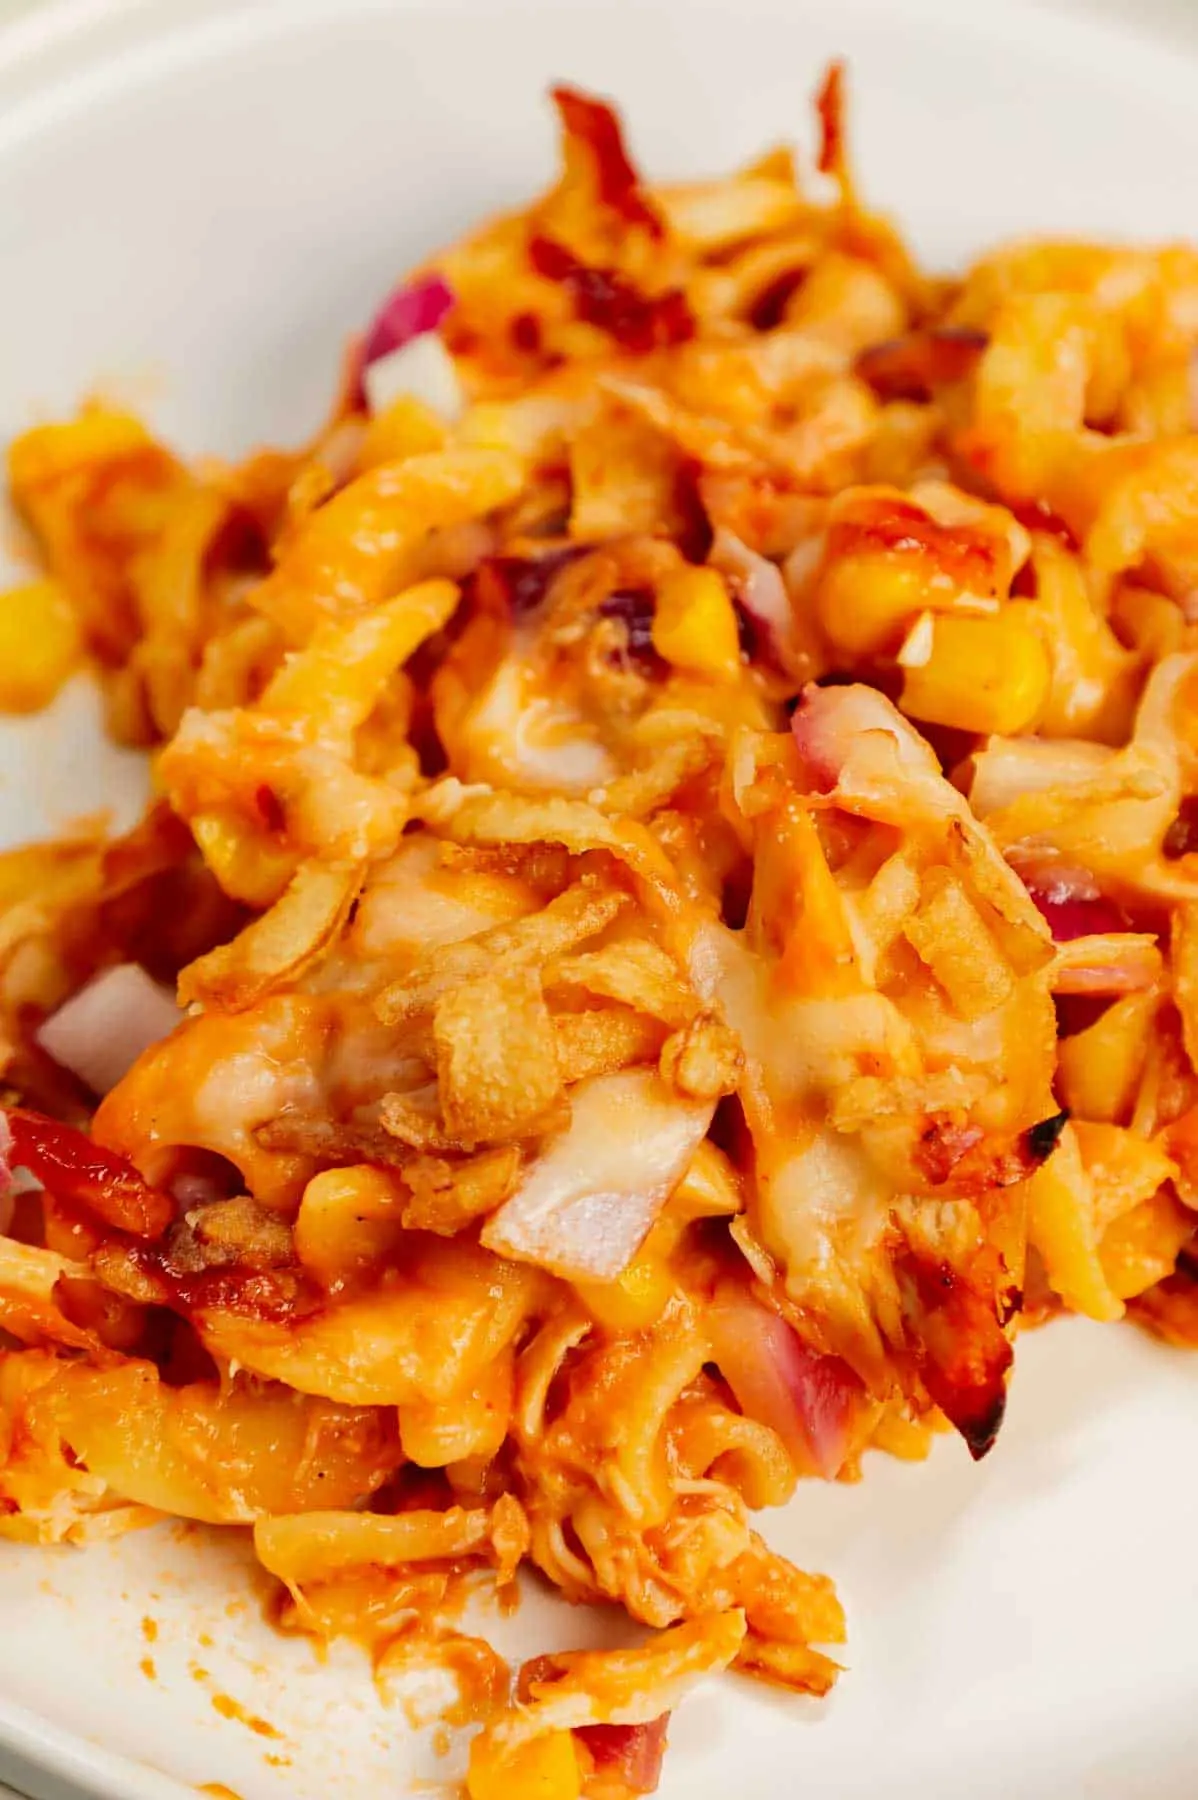 BBQ Chicken Casserole is a hearty dish loaded with egg noodles, shredded rotisserie chicken, diced red onions, corn, cream of chicken soup, barbecue sauce, cheese and French's crispy fried onions.